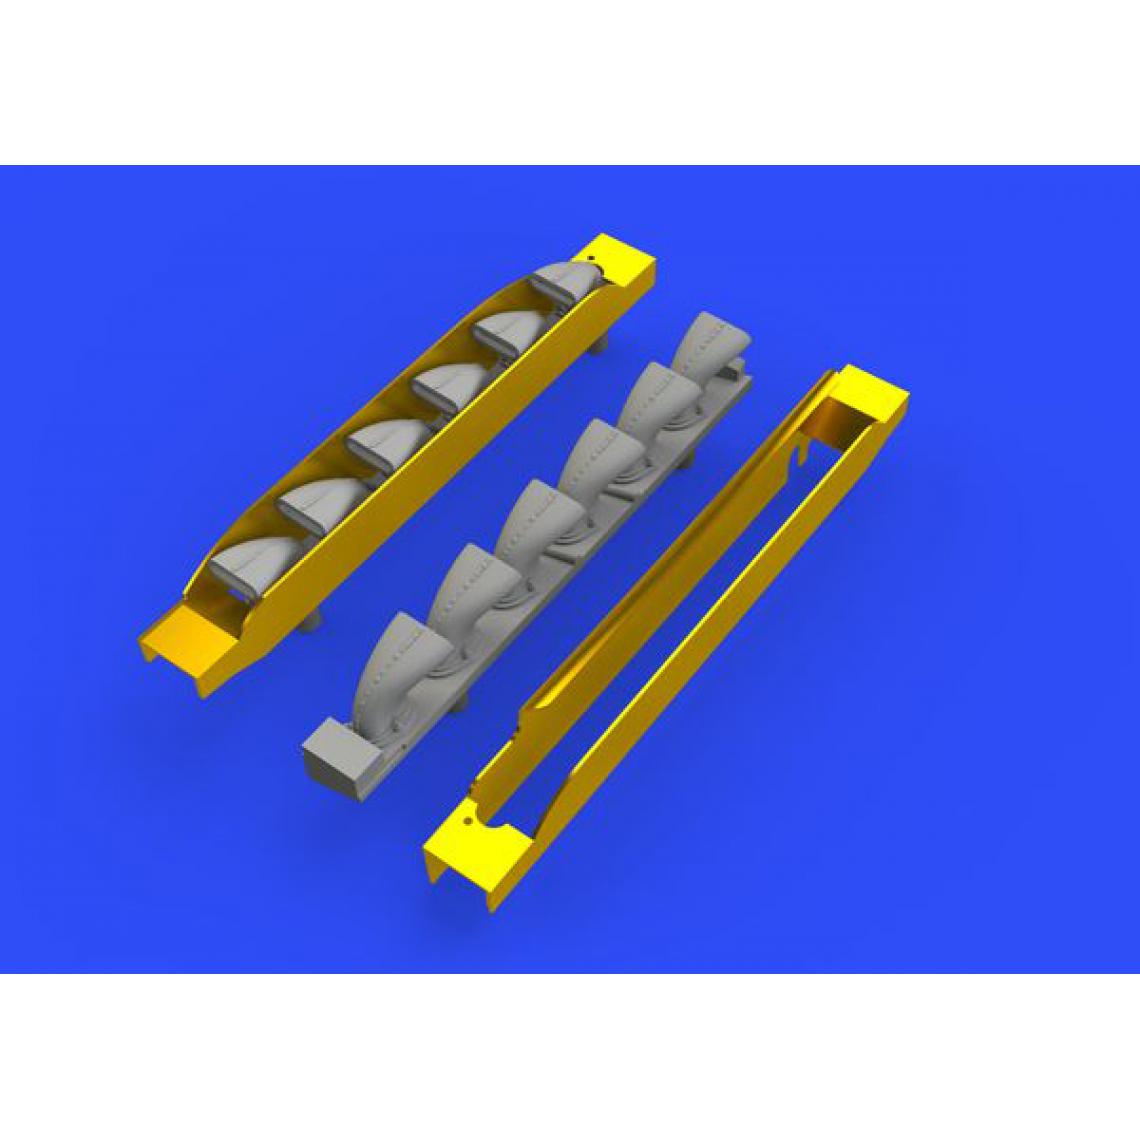 Eduard - Bf 109G-6 exhaust stacks for Tamiya - 1:48e - Eduard Accessories - Accessoires et pièces